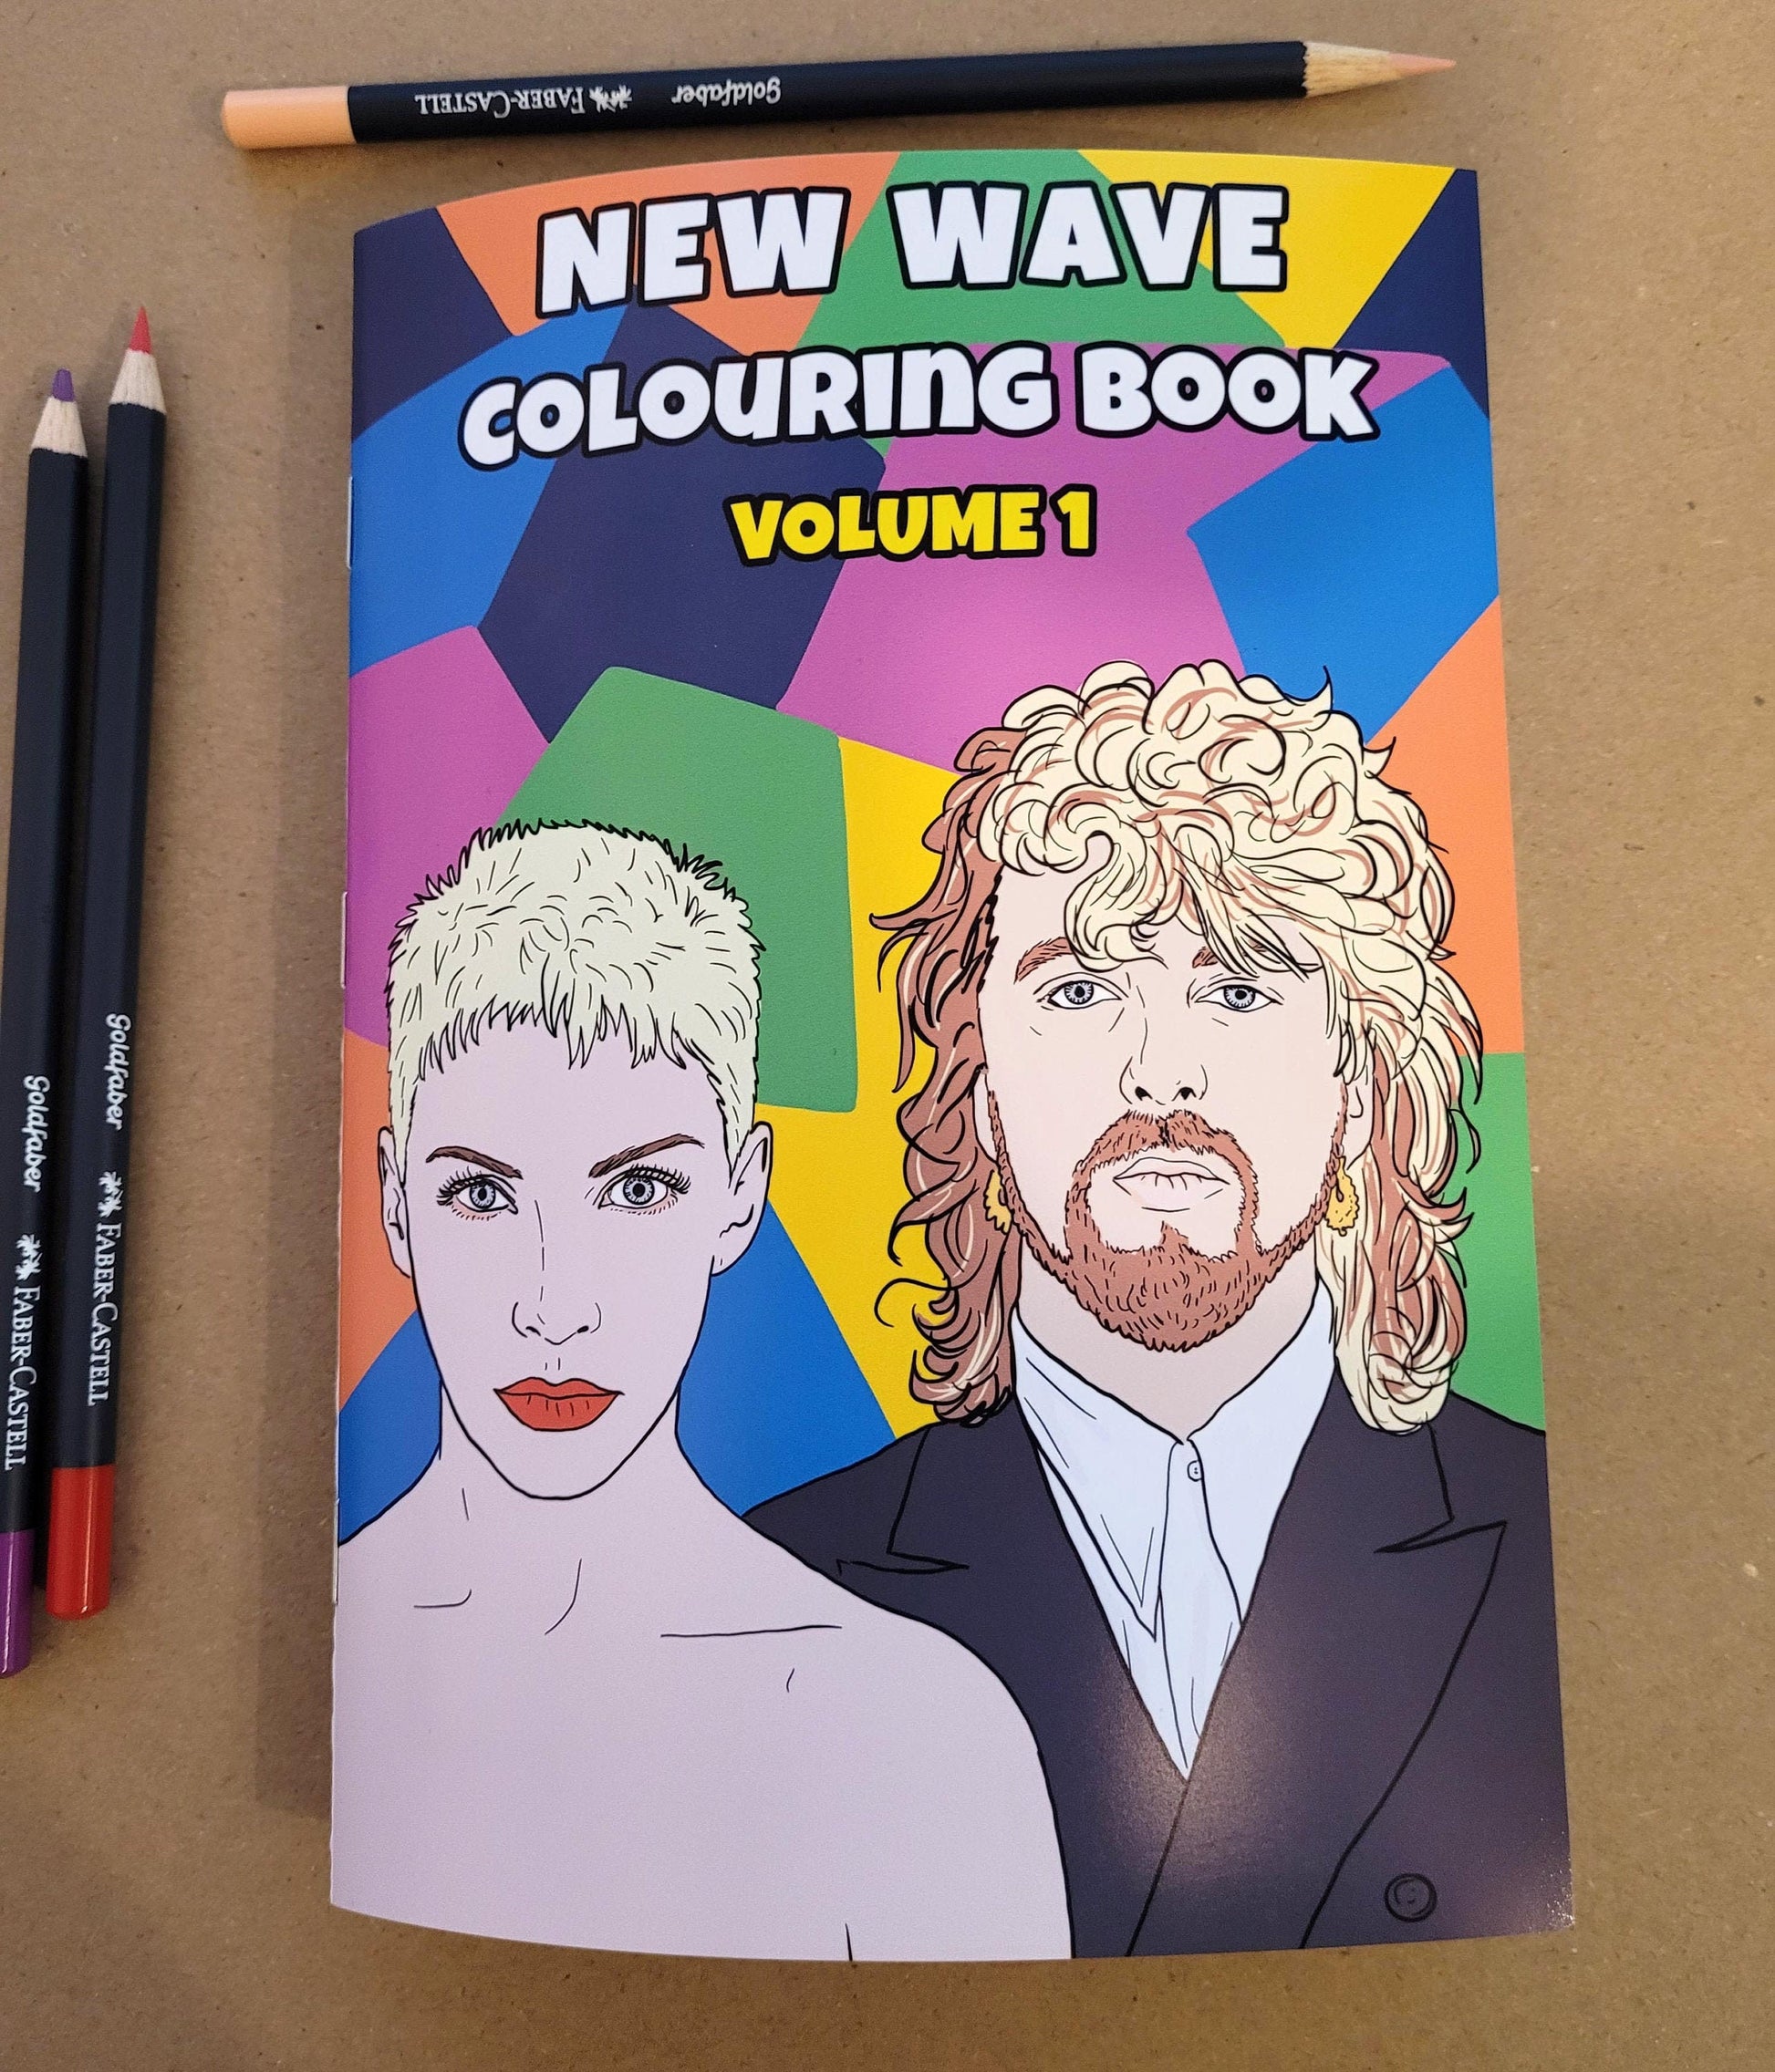 New Wave Colouring Book, adult colouring book, gift for new wave music fan, activity book, birthday gift, 80s music colouring book